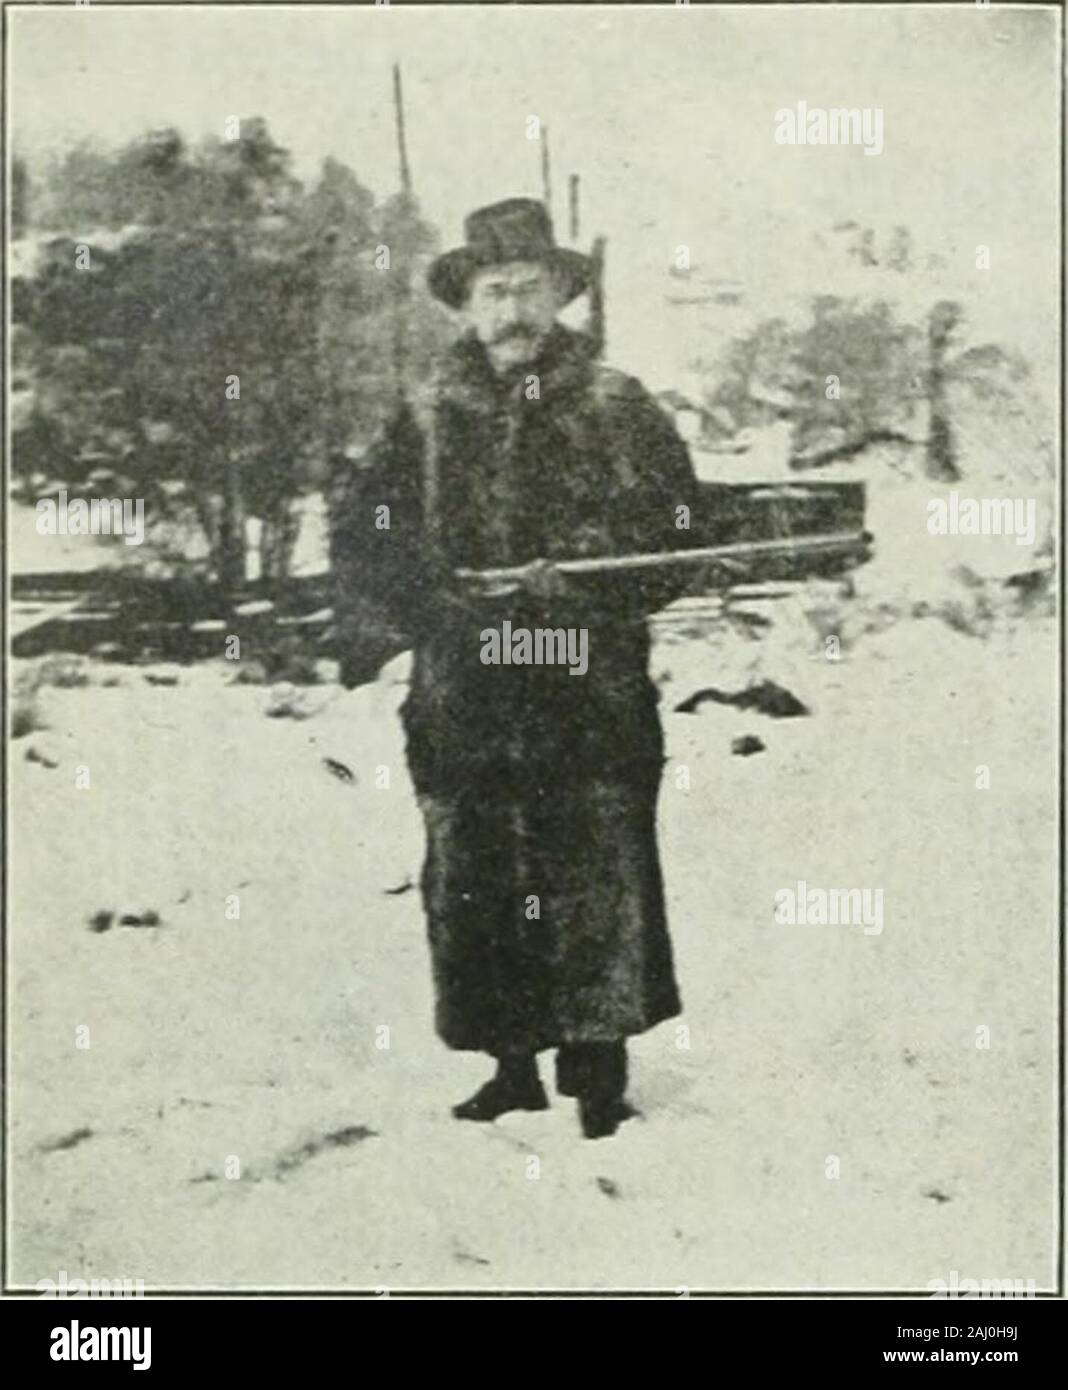 Rod and gun . James Irvine, Pioneer and Captain of the Pleasant ValleyHunt Club. n84 ?ROT) A (;r ix Canada. Our Host, Thomas Irvine. light refreshments, slept the sleep of thejust. Xext morning we were taken incharge by St. Hubert Elkington, an en-thusiastic hunter, and spent the day plea-santly in the vicinity of Plevna, partridgeshooting. Sunday morning found us in a smallquaint Episcopalian Church, where thepopular clergyman in charge, Rev. GlenLloyd, preached to a congregation num-bering eighteen. The choir was com-posed of six girls under fifteen years ofage, and the freshness and sweet Stock Photo